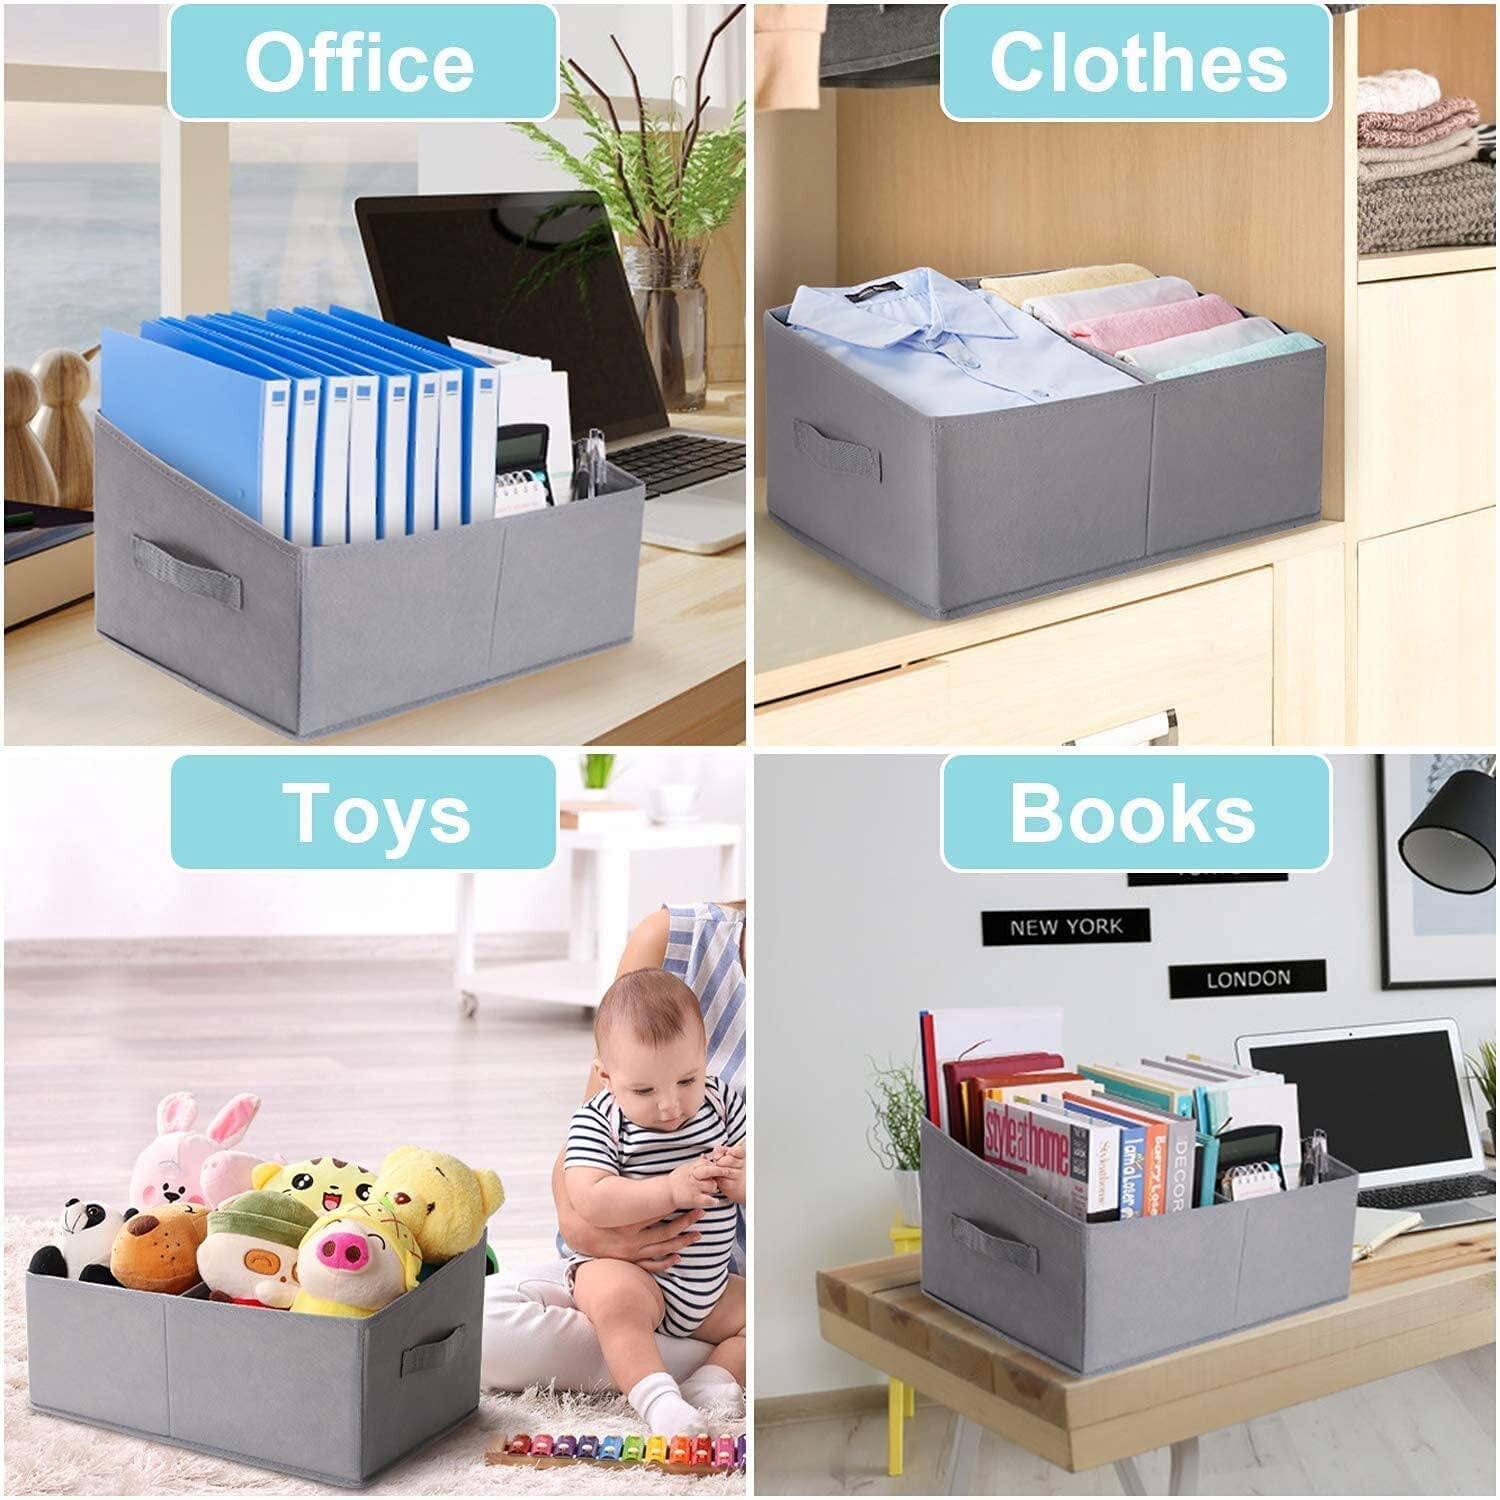 DIMJ Fabric Cube Storage Bins, Large Closet Organizers and Storage Cube Bins,  Folding Cloth Bins with Handle for Shelf, Trapezoid Divider Basket for Toy  DVD Books Files for Office Nursery, Black 